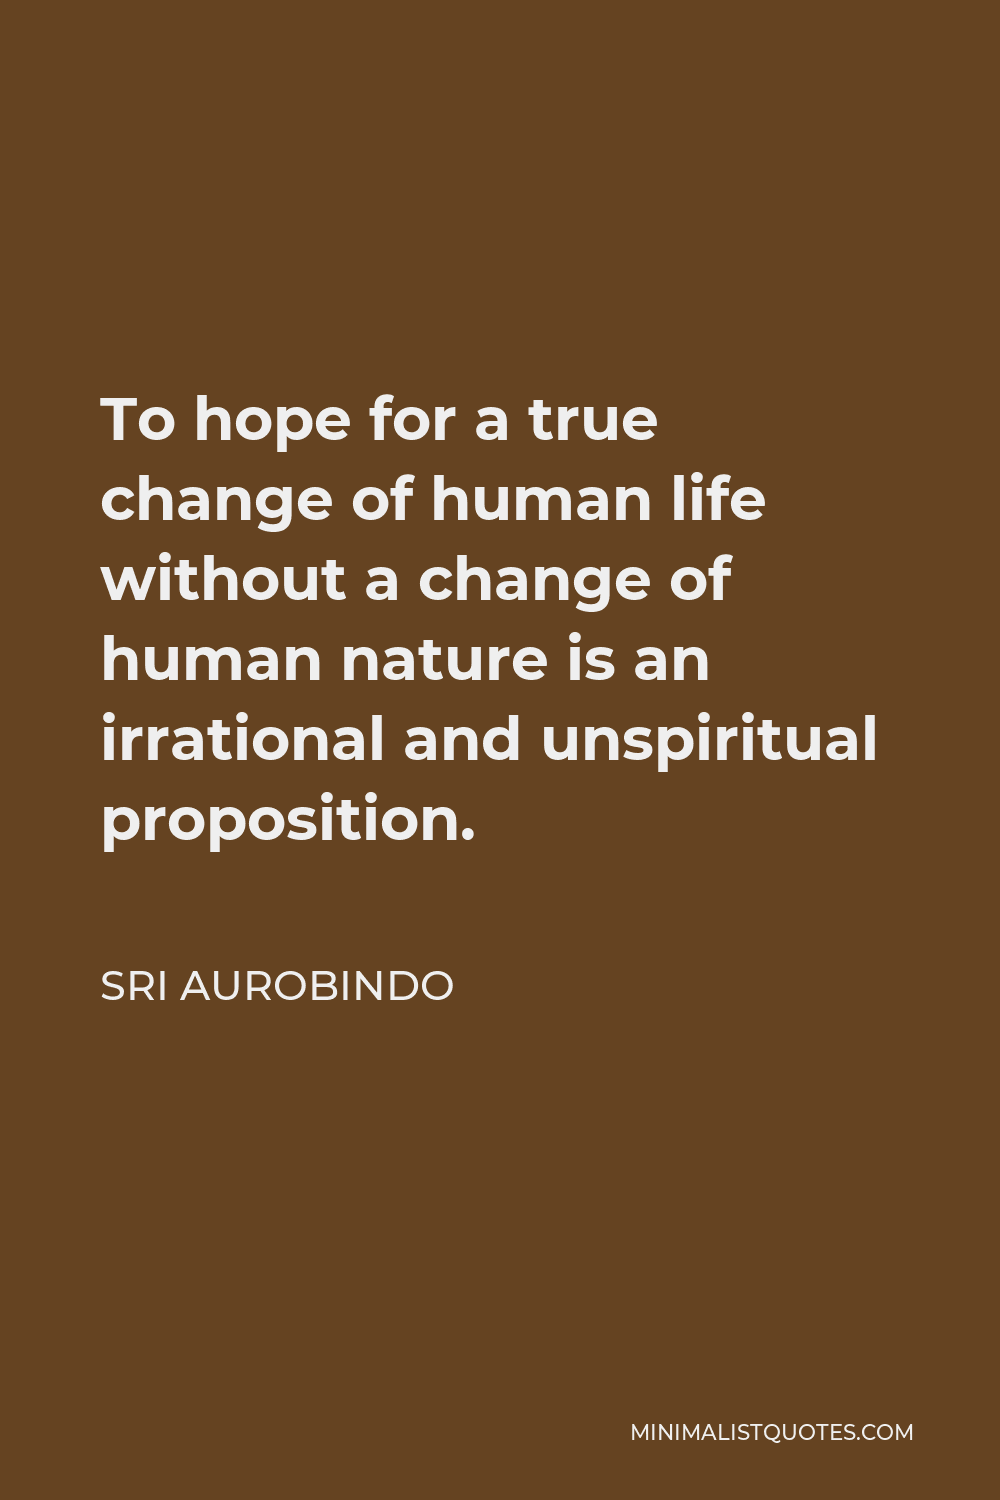 Sri Aurobindo Quote - To hope for a true change of human life without a change of human nature is an irrational and unspiritual proposition.